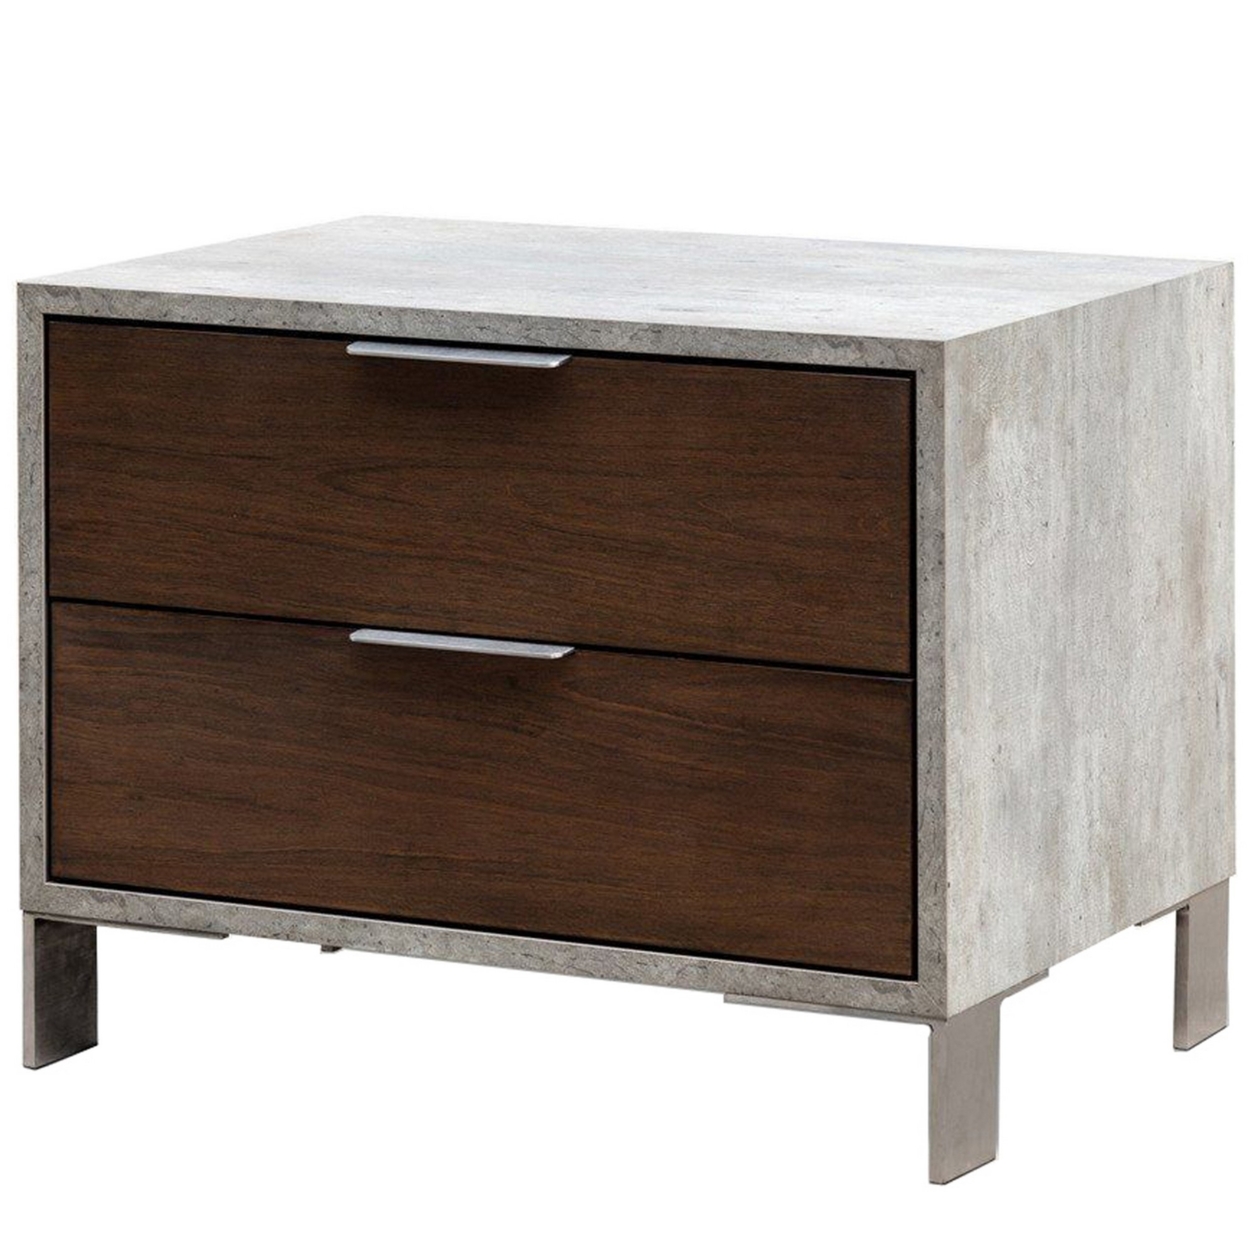 2 Drawer Faux Concrete Nightstand With Metal Legs, Brown And Gray- Saltoro Sherpi